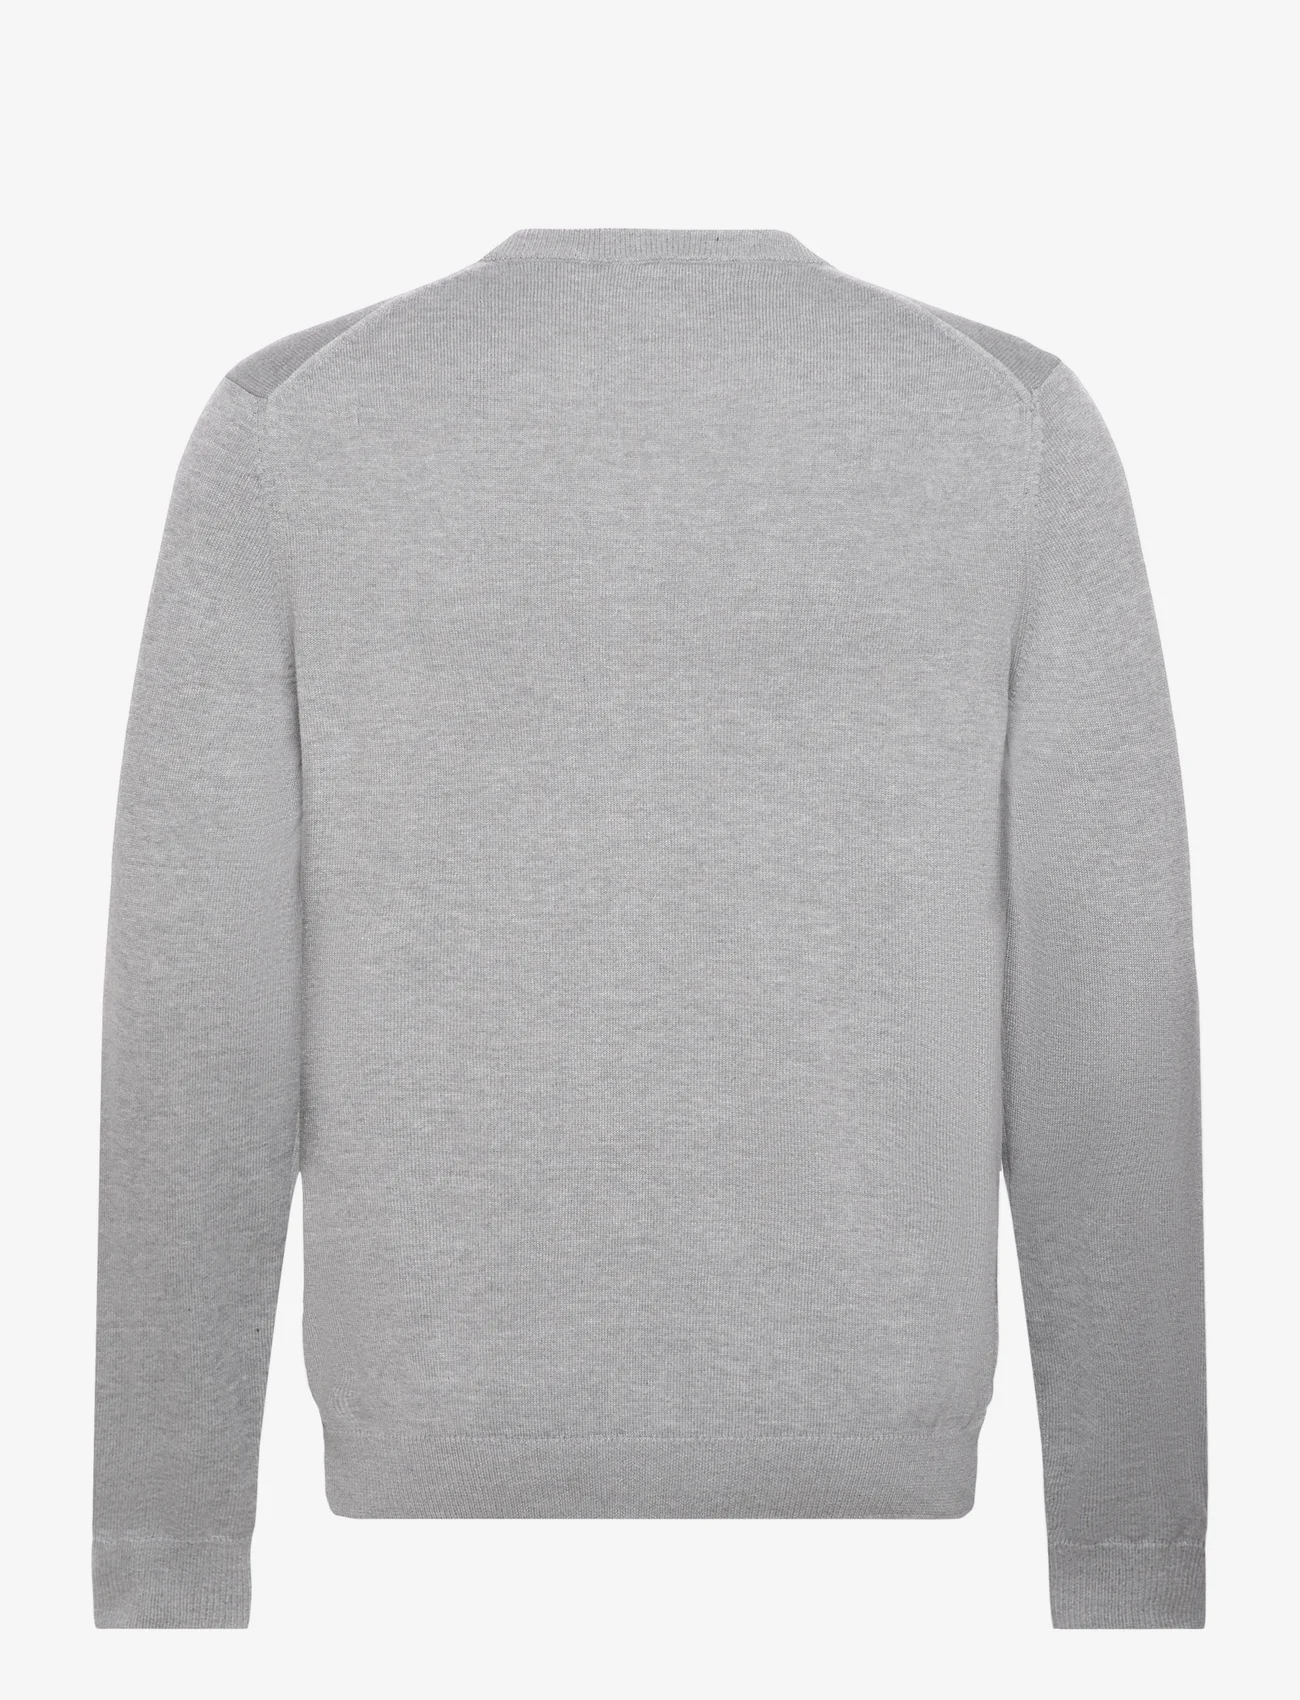 Lacoste - SWEATERS - knitted round necks - silver chine - 1